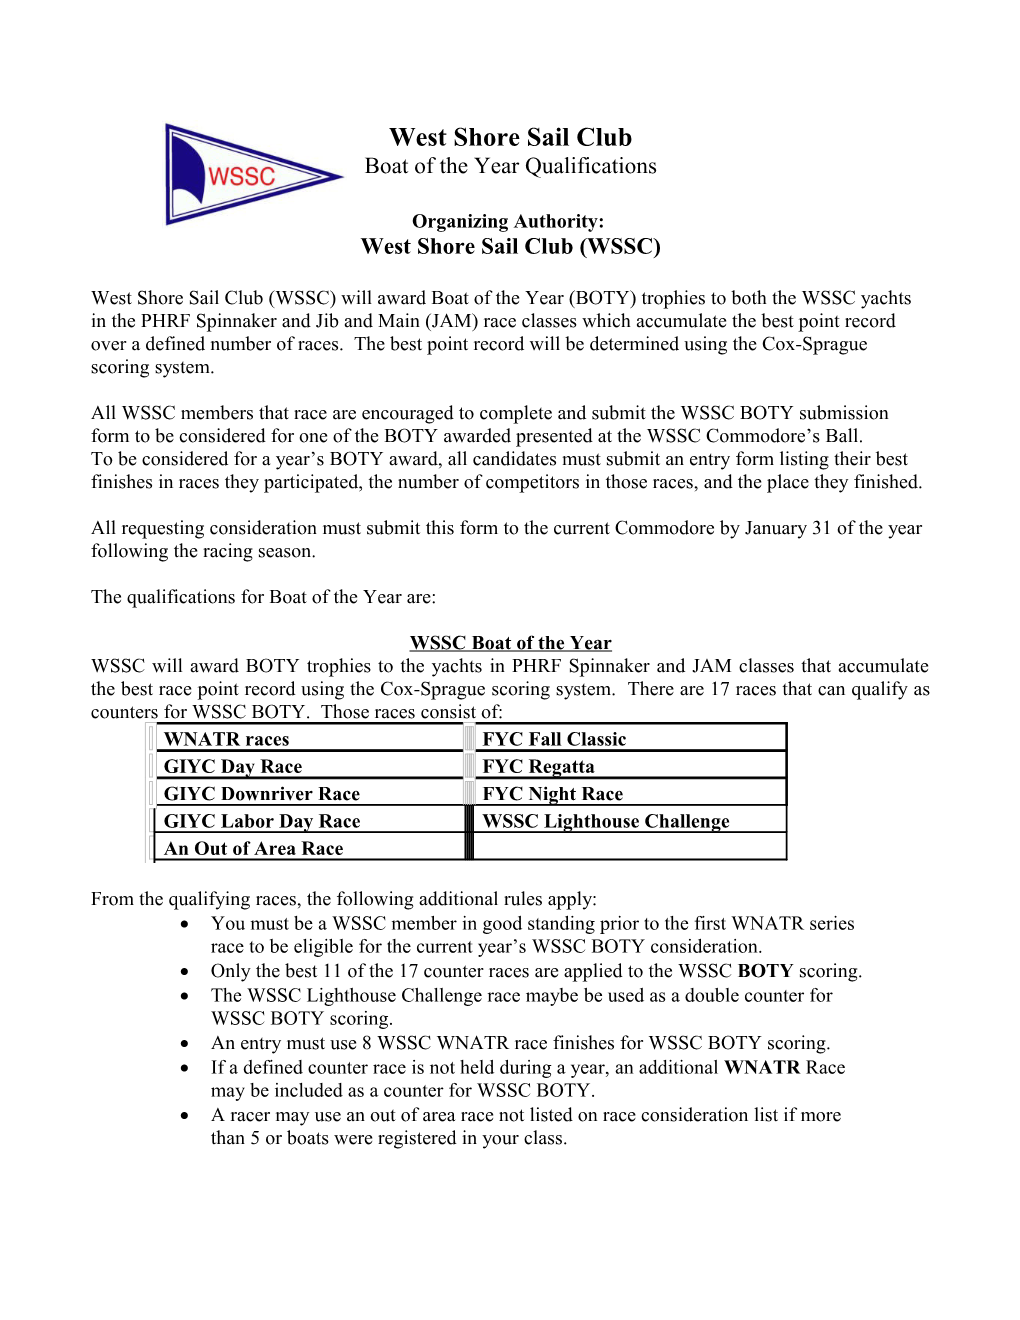 All Boat of the Year Candidates Must Submit a List of 2012 Races Completed to Be Considered